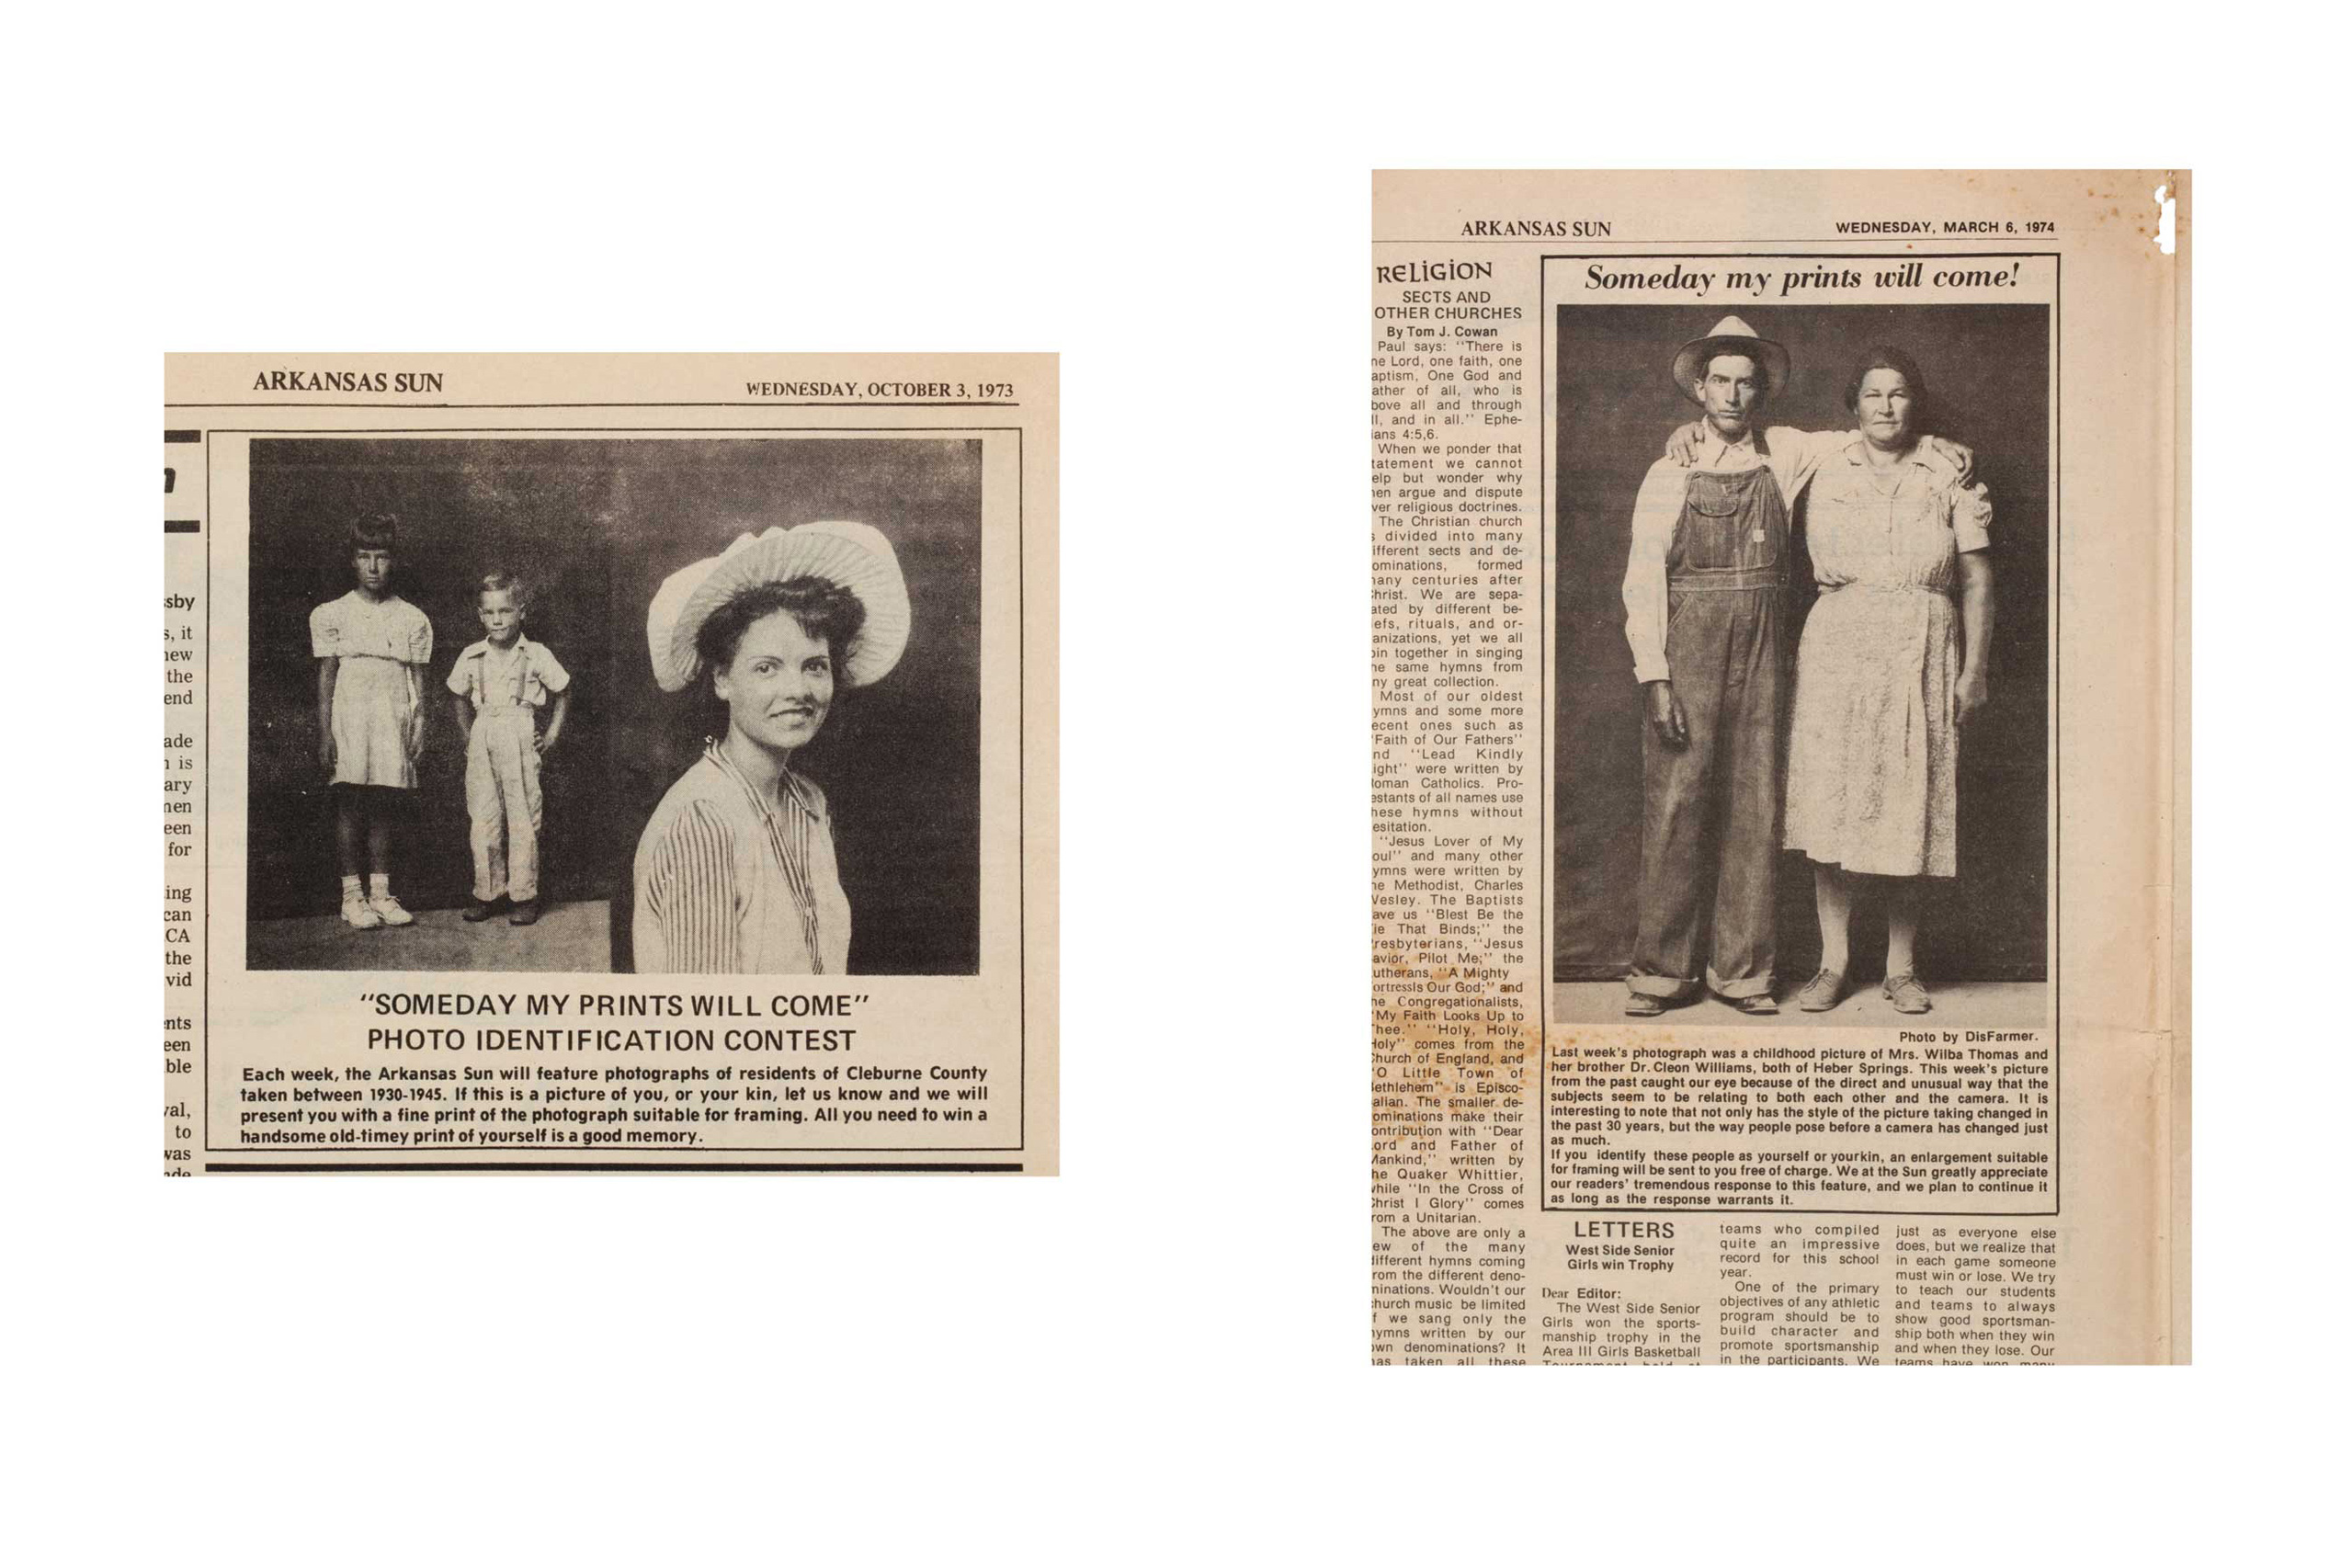 Left:  Someday my prints will come: Photo Identification Contest.  Arkansas Sun Clara and Joe Philipps (left), Jeri (Sanders) Collins (right), Oct. 3, 1973
                              
                              Right:  Someday my prints will come!  Arkansas Sun, Ed and Mamie Barger, March 6, 1974